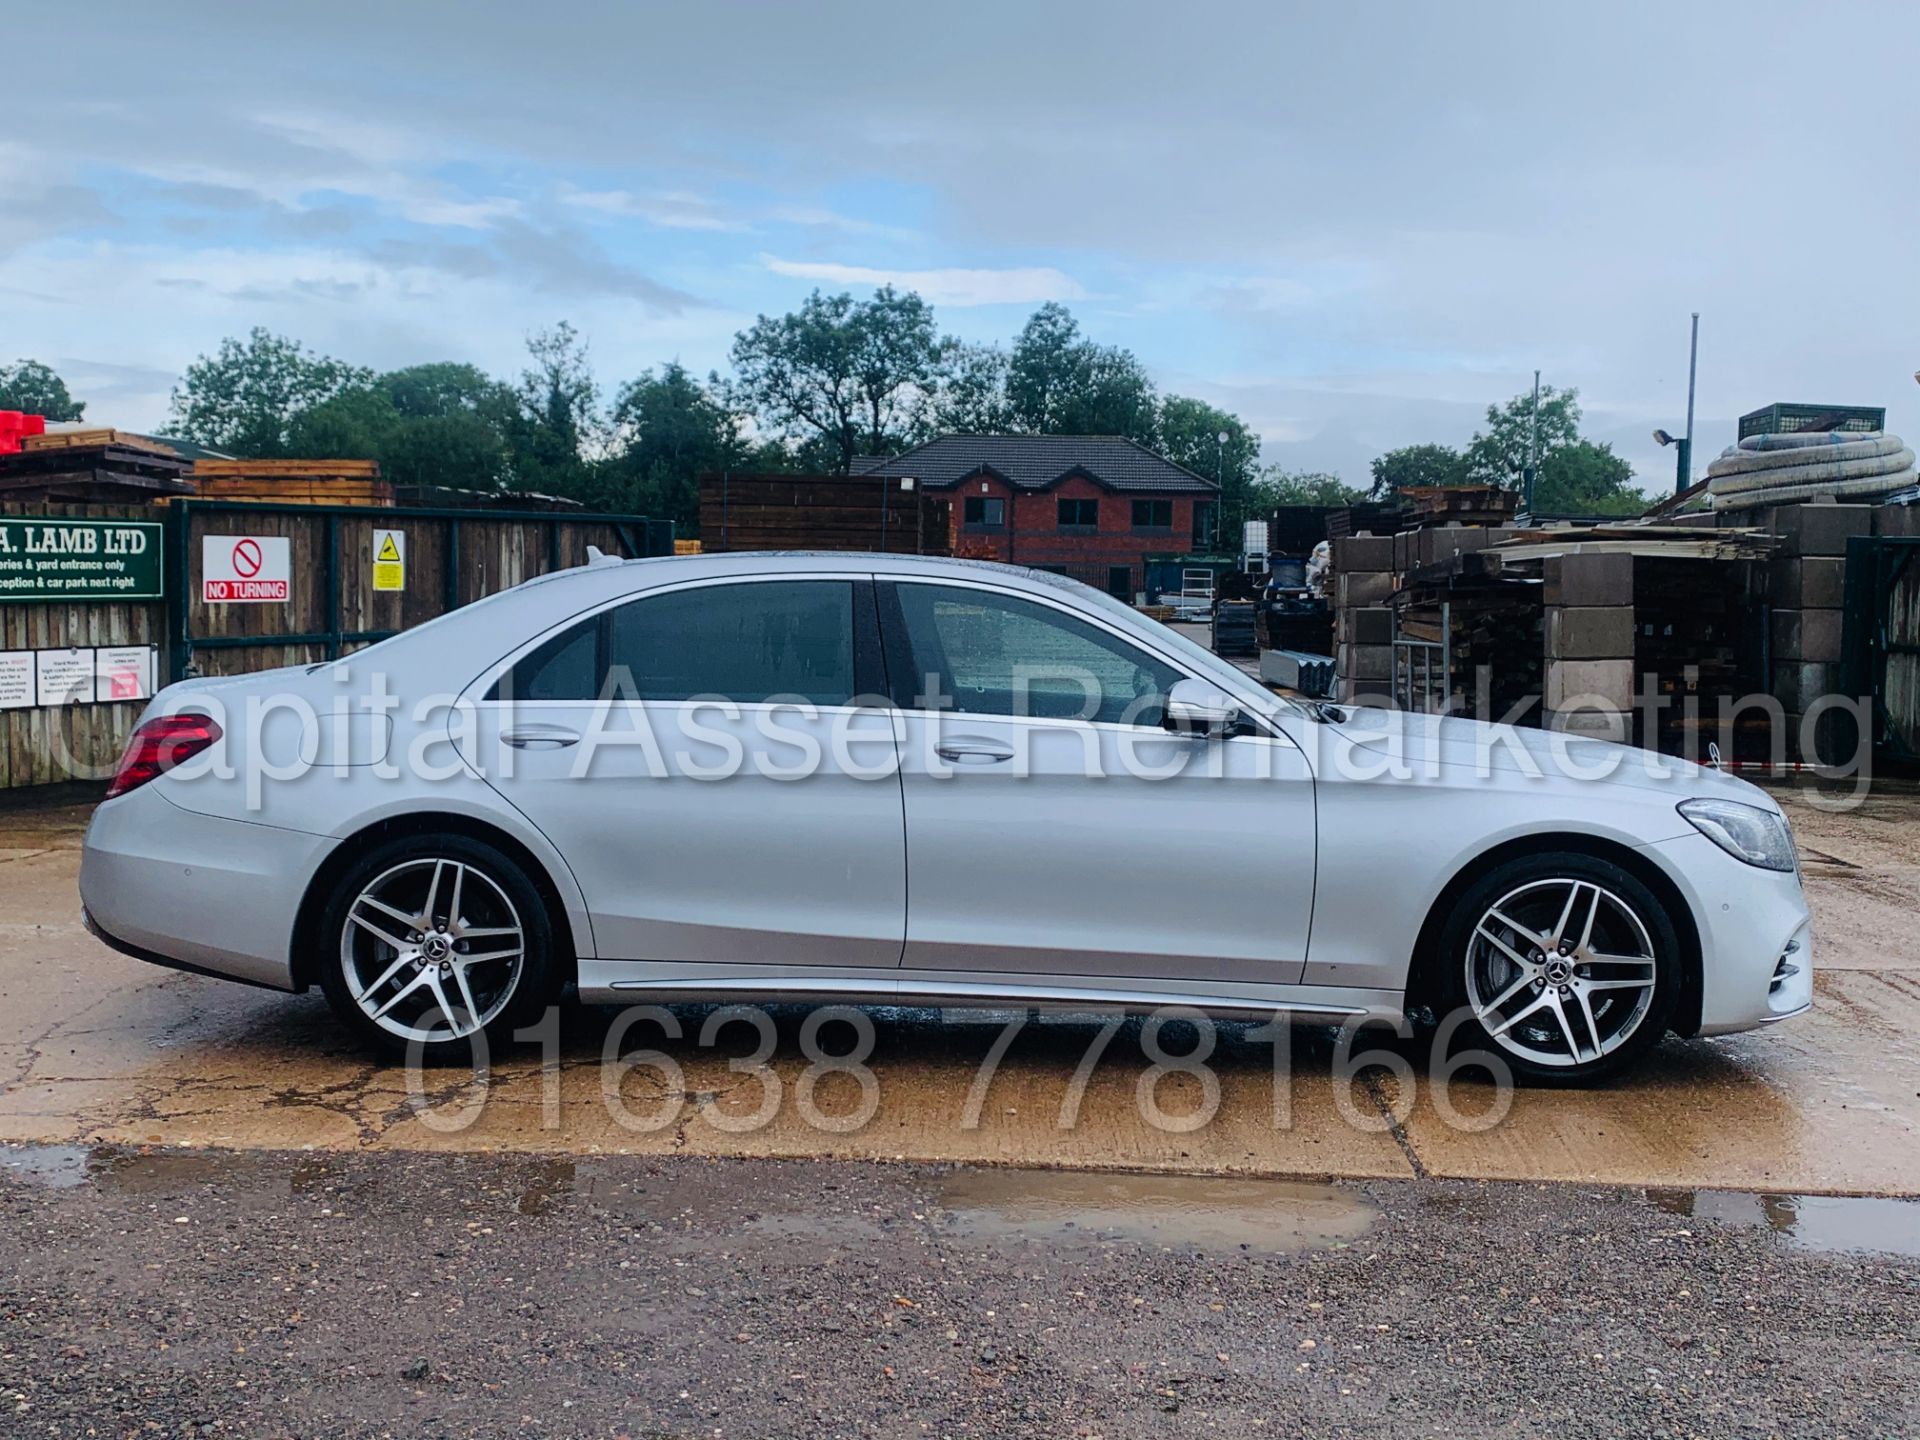 MERCEDES-BENZ S350D LWB *AMG LINE - EXECUTIVE PREMIUM SALOON* (2018) 9-G TRONIC *TOP OF THE RANGE* - Image 14 of 71